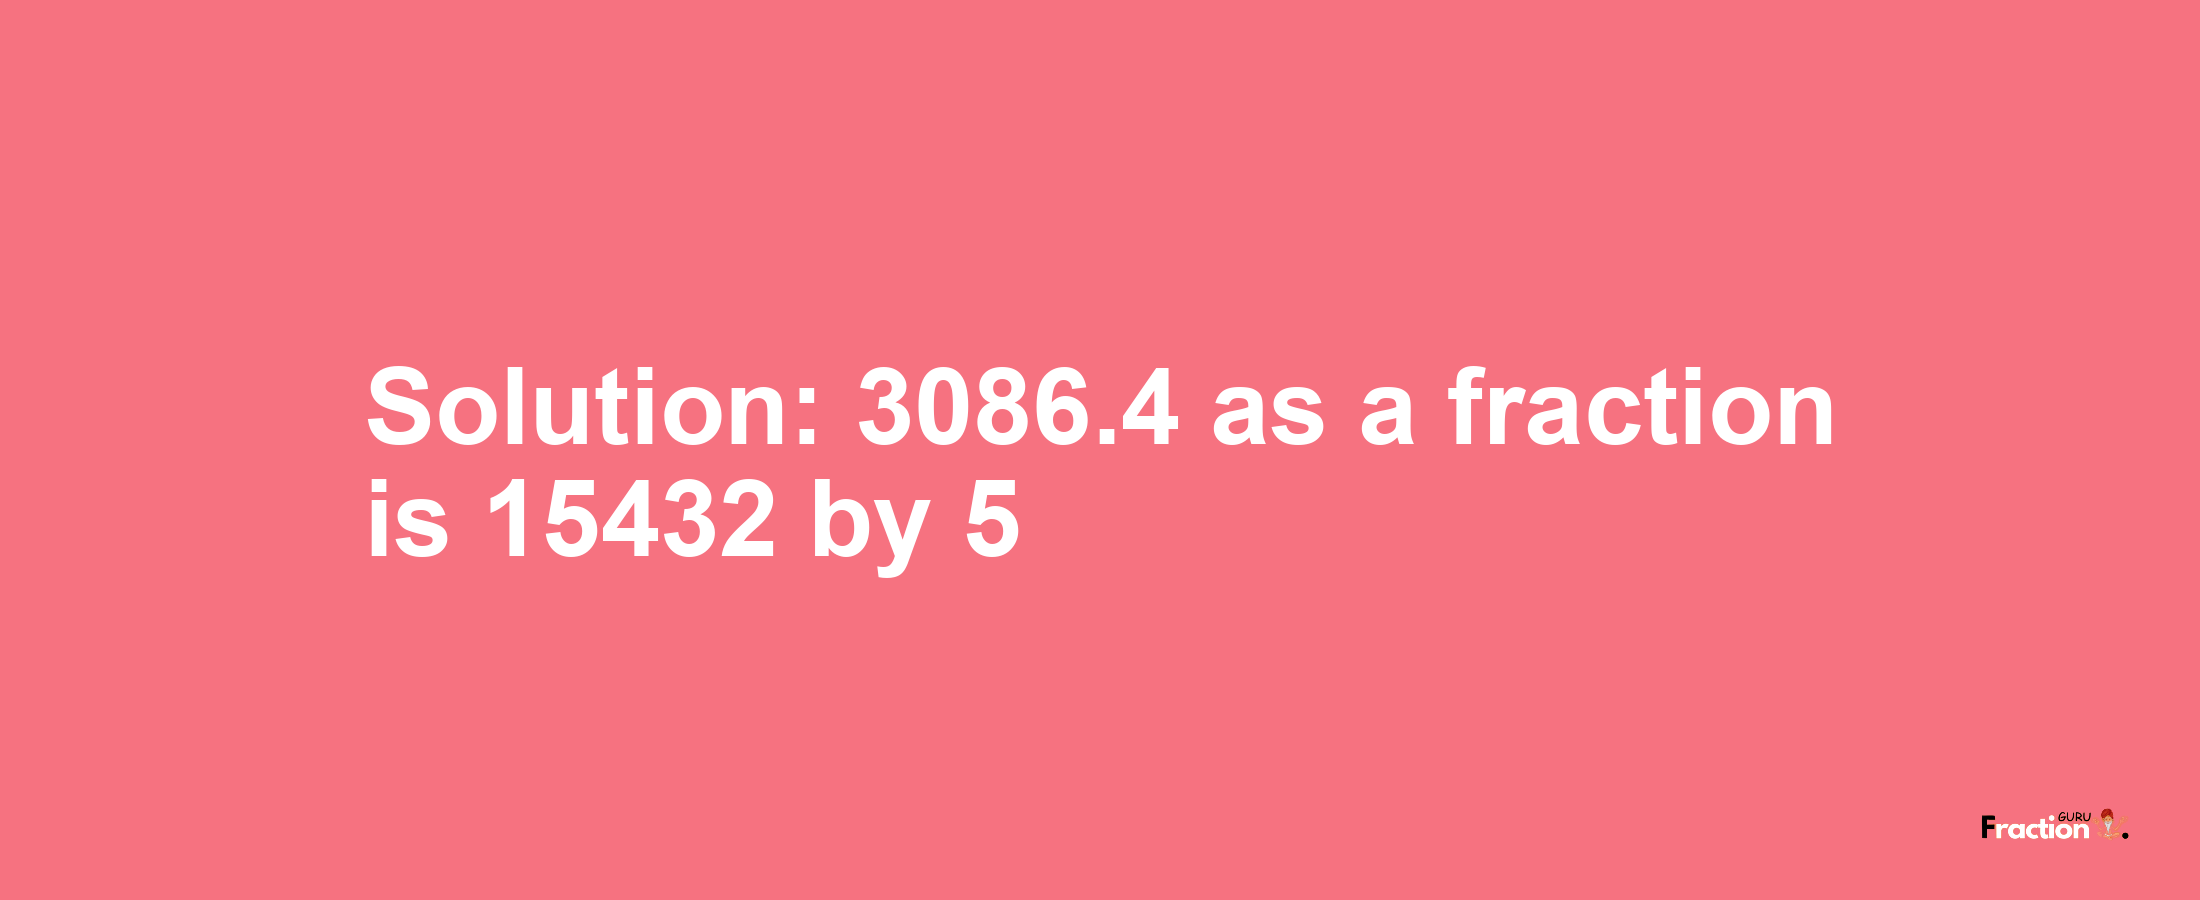 Solution:3086.4 as a fraction is 15432/5